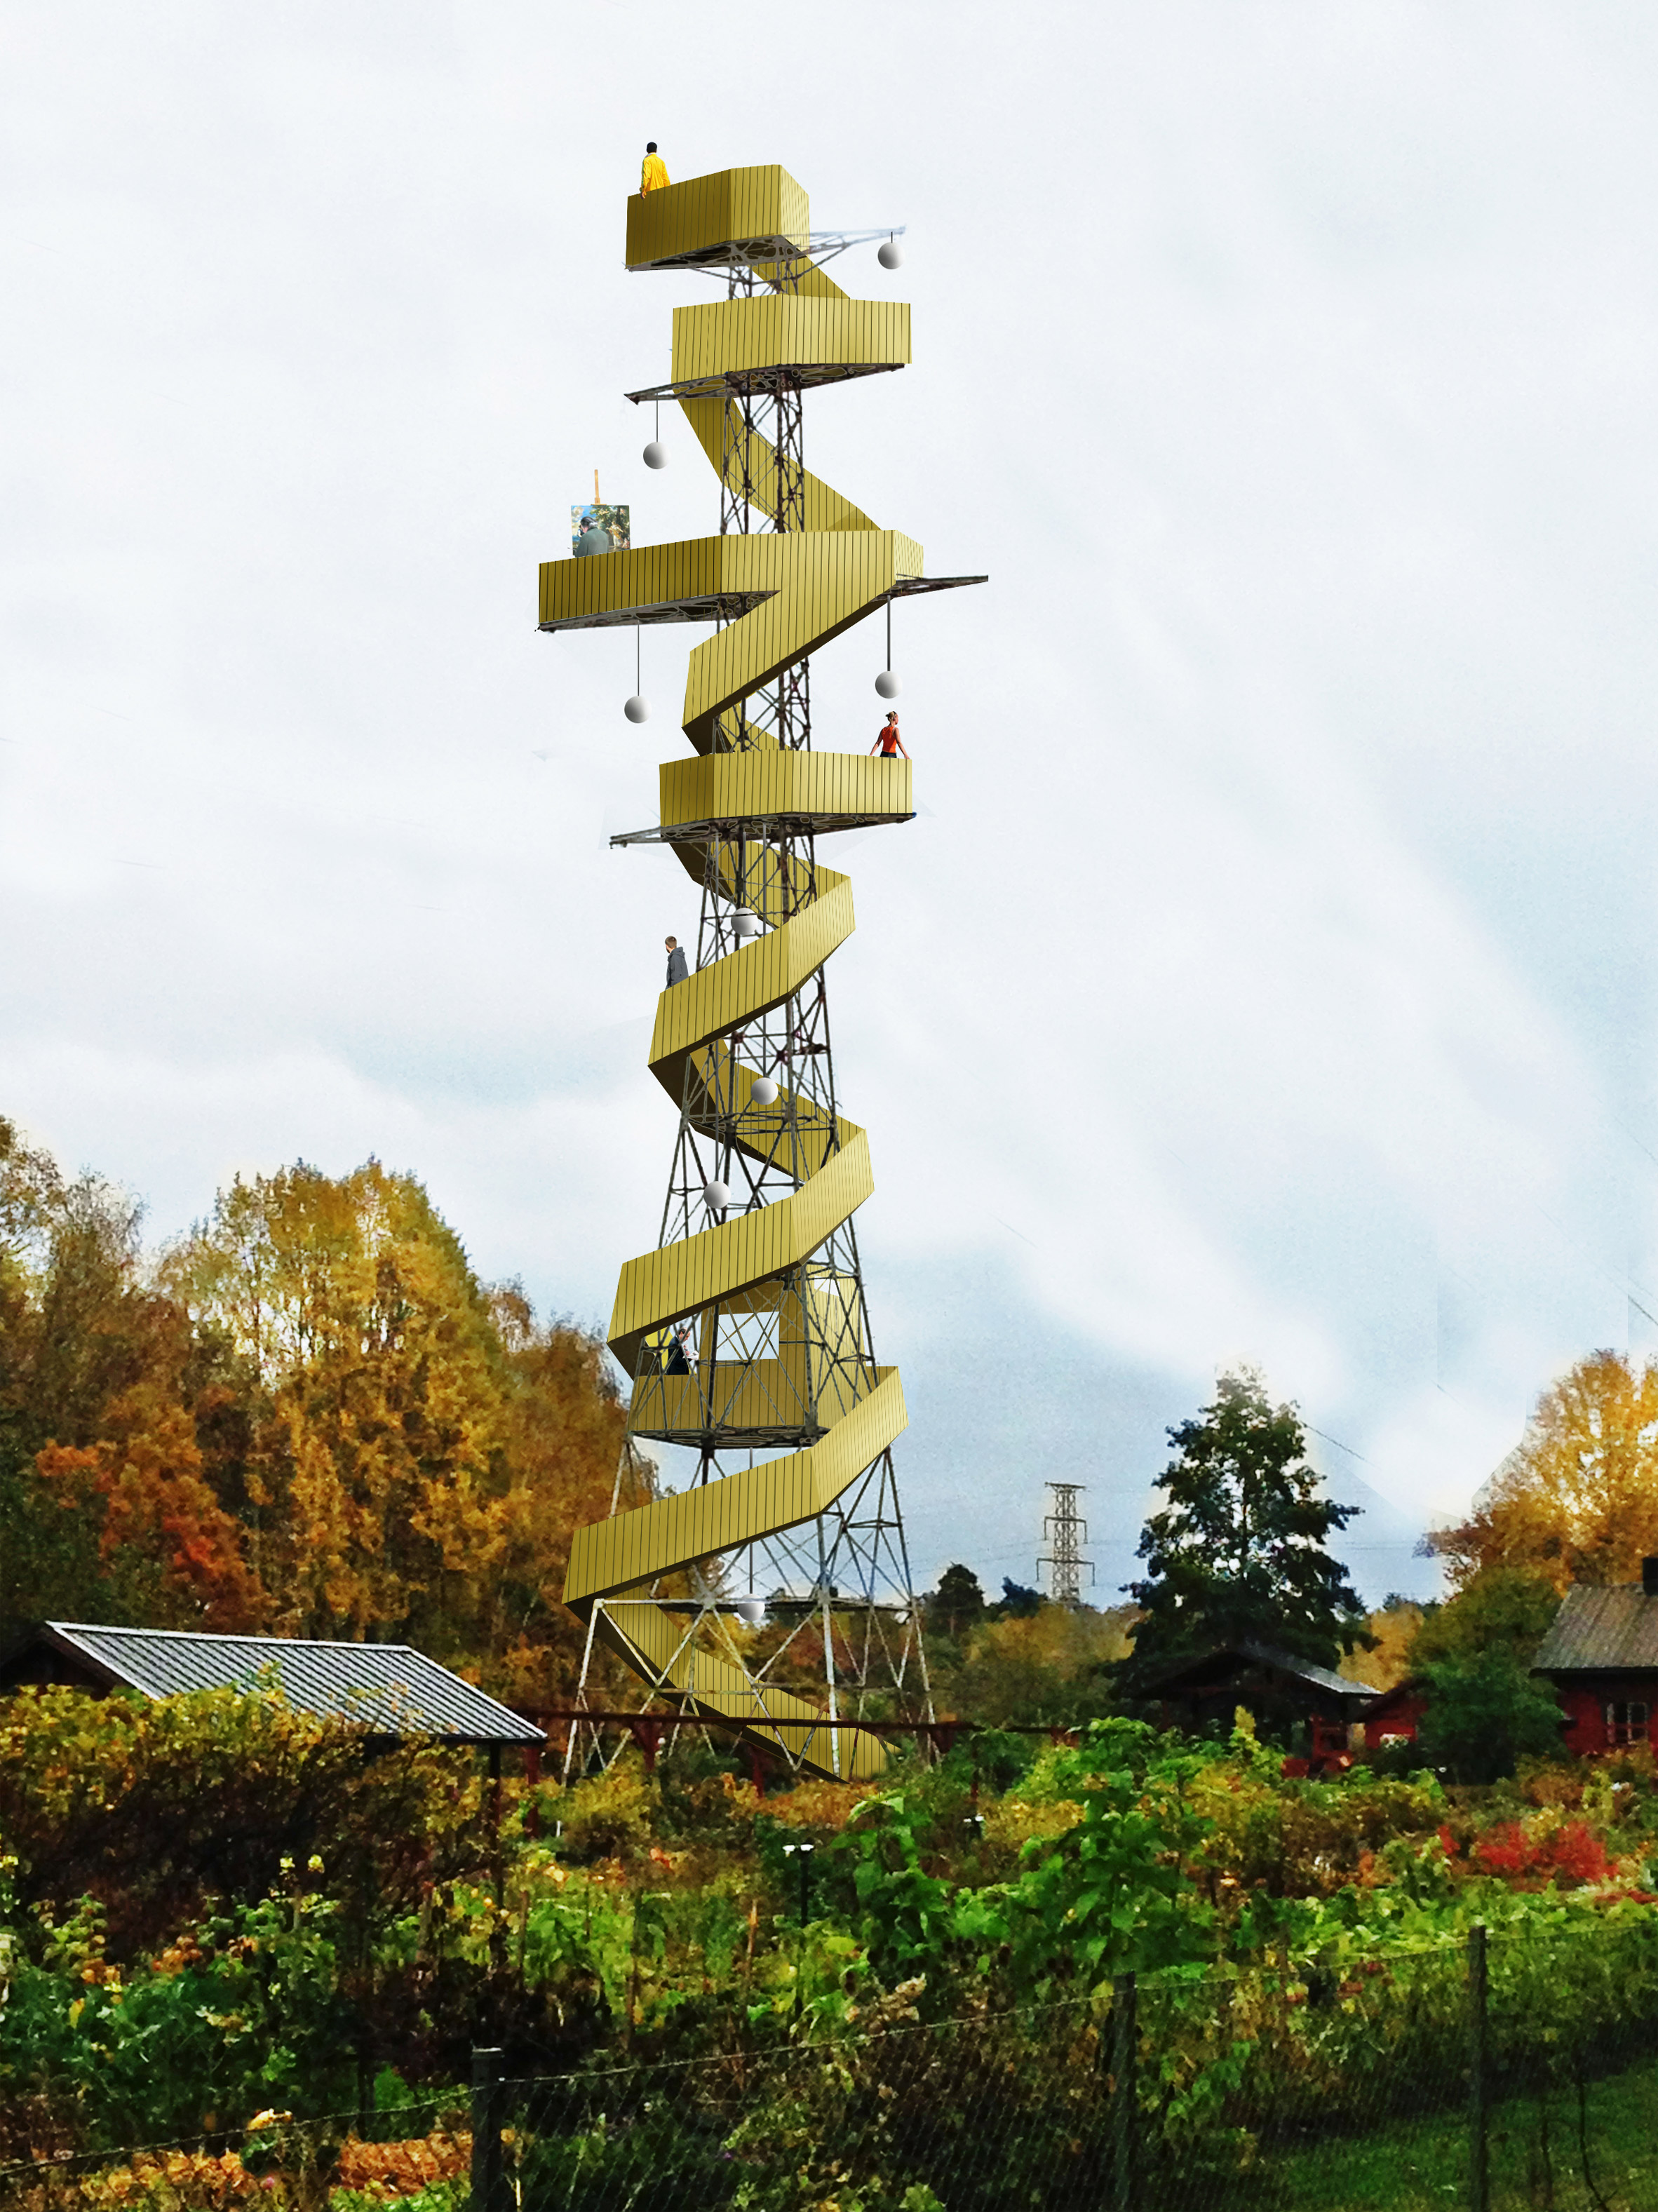 Stockholm pylons converted into "picnic towers" in Anders Berensson proposal